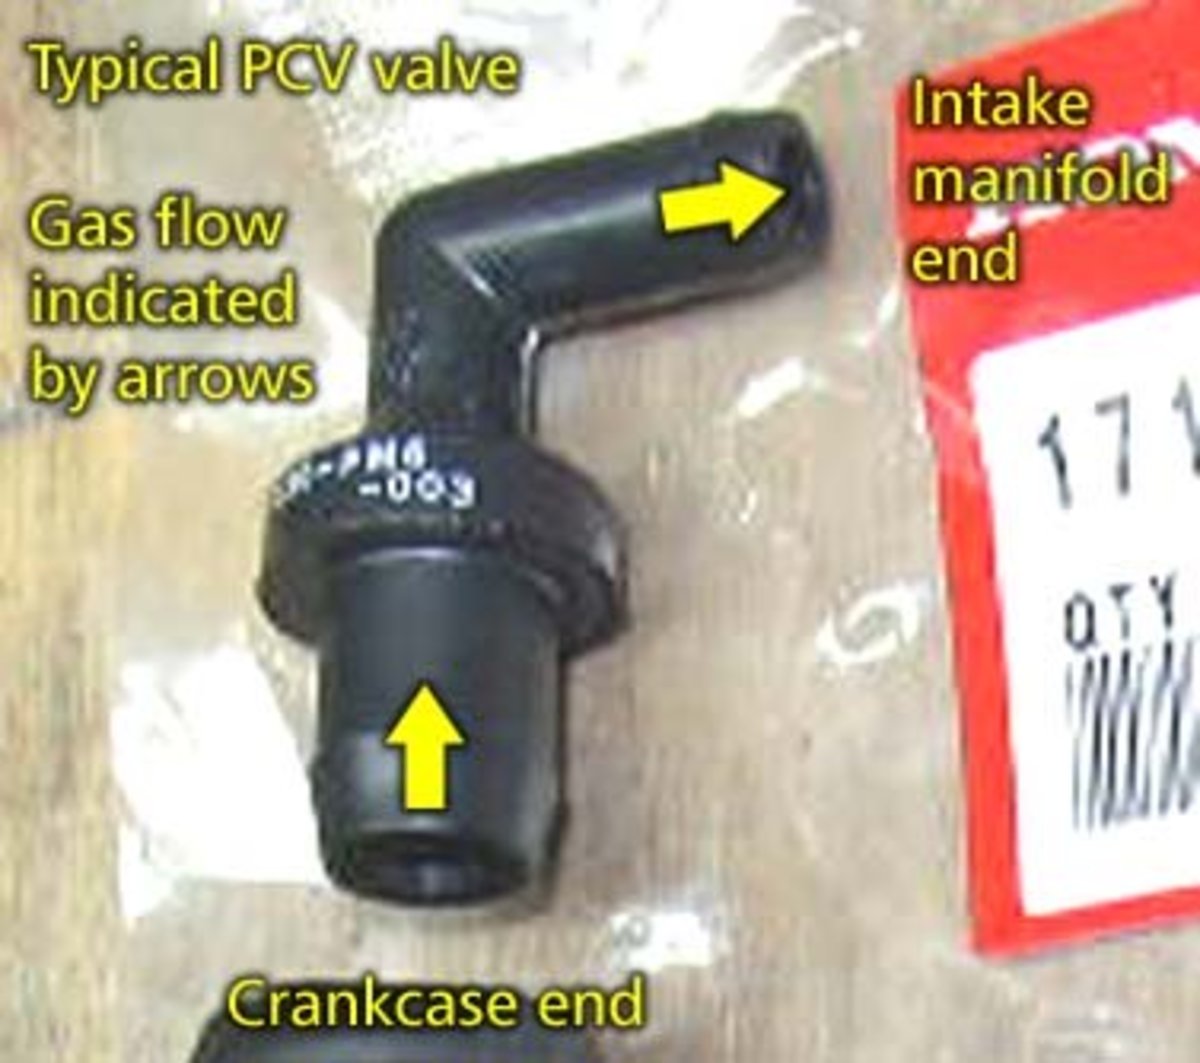 Check and replace the PCV valve, if necessary.